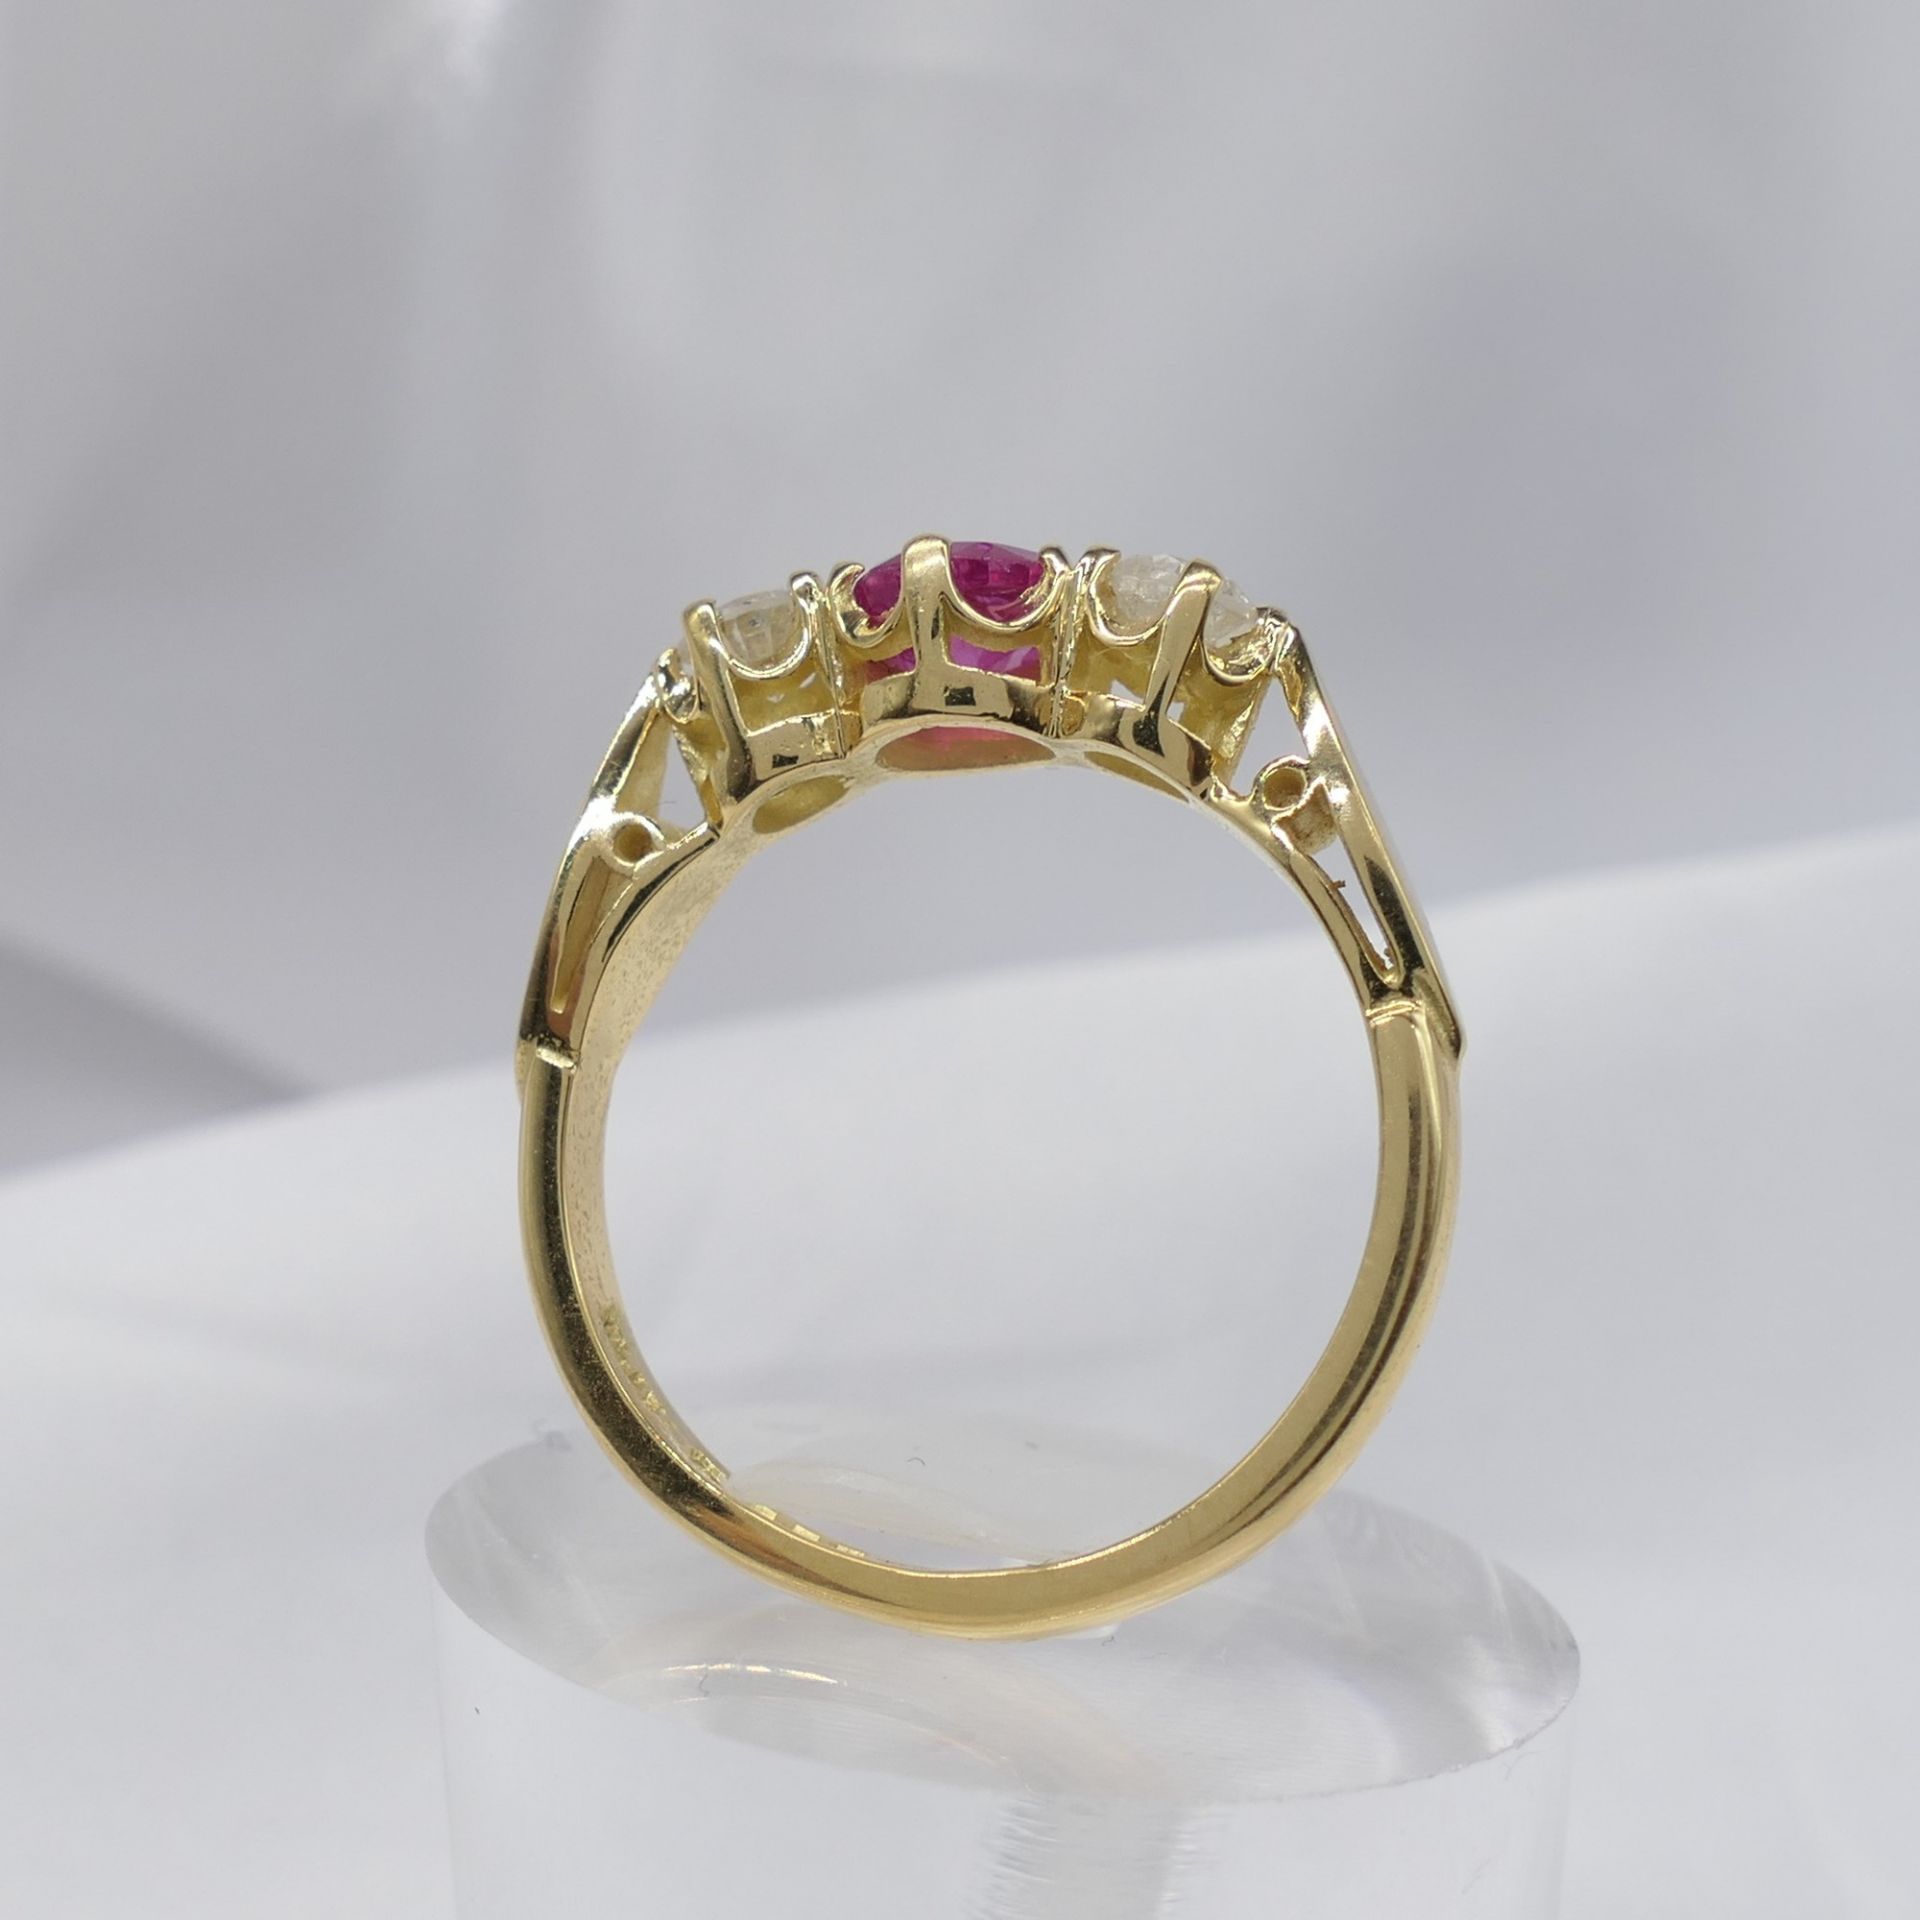 Vintage 18 Carat Ruby and Diamond 3 Stone Yellow Gold Ring - Image 6 of 7